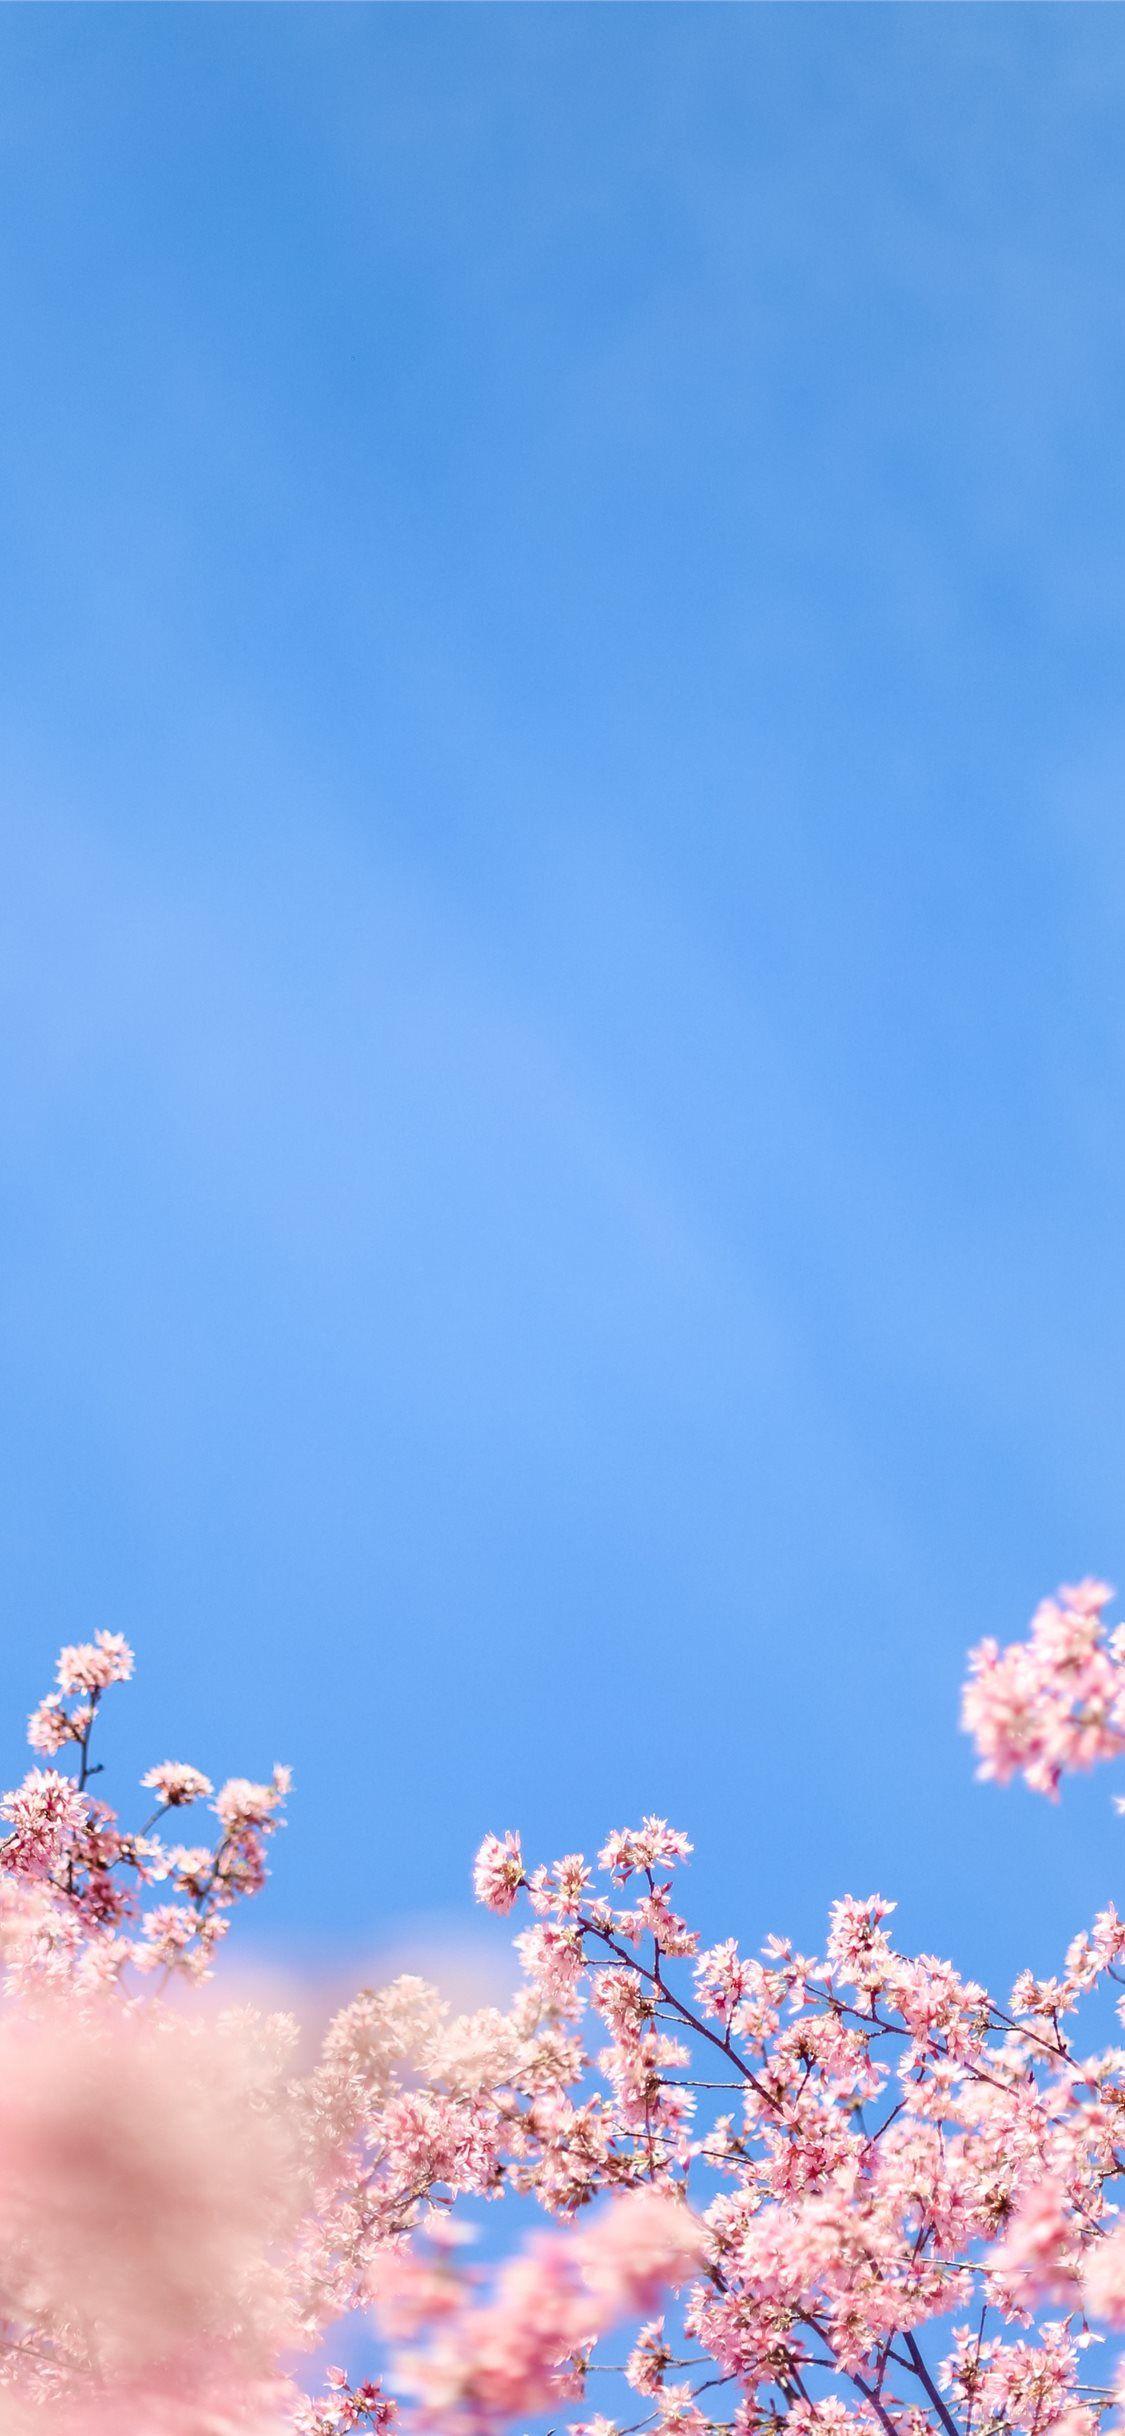 30000 Flowers And Sky Pictures  Download Free Images on Unsplash